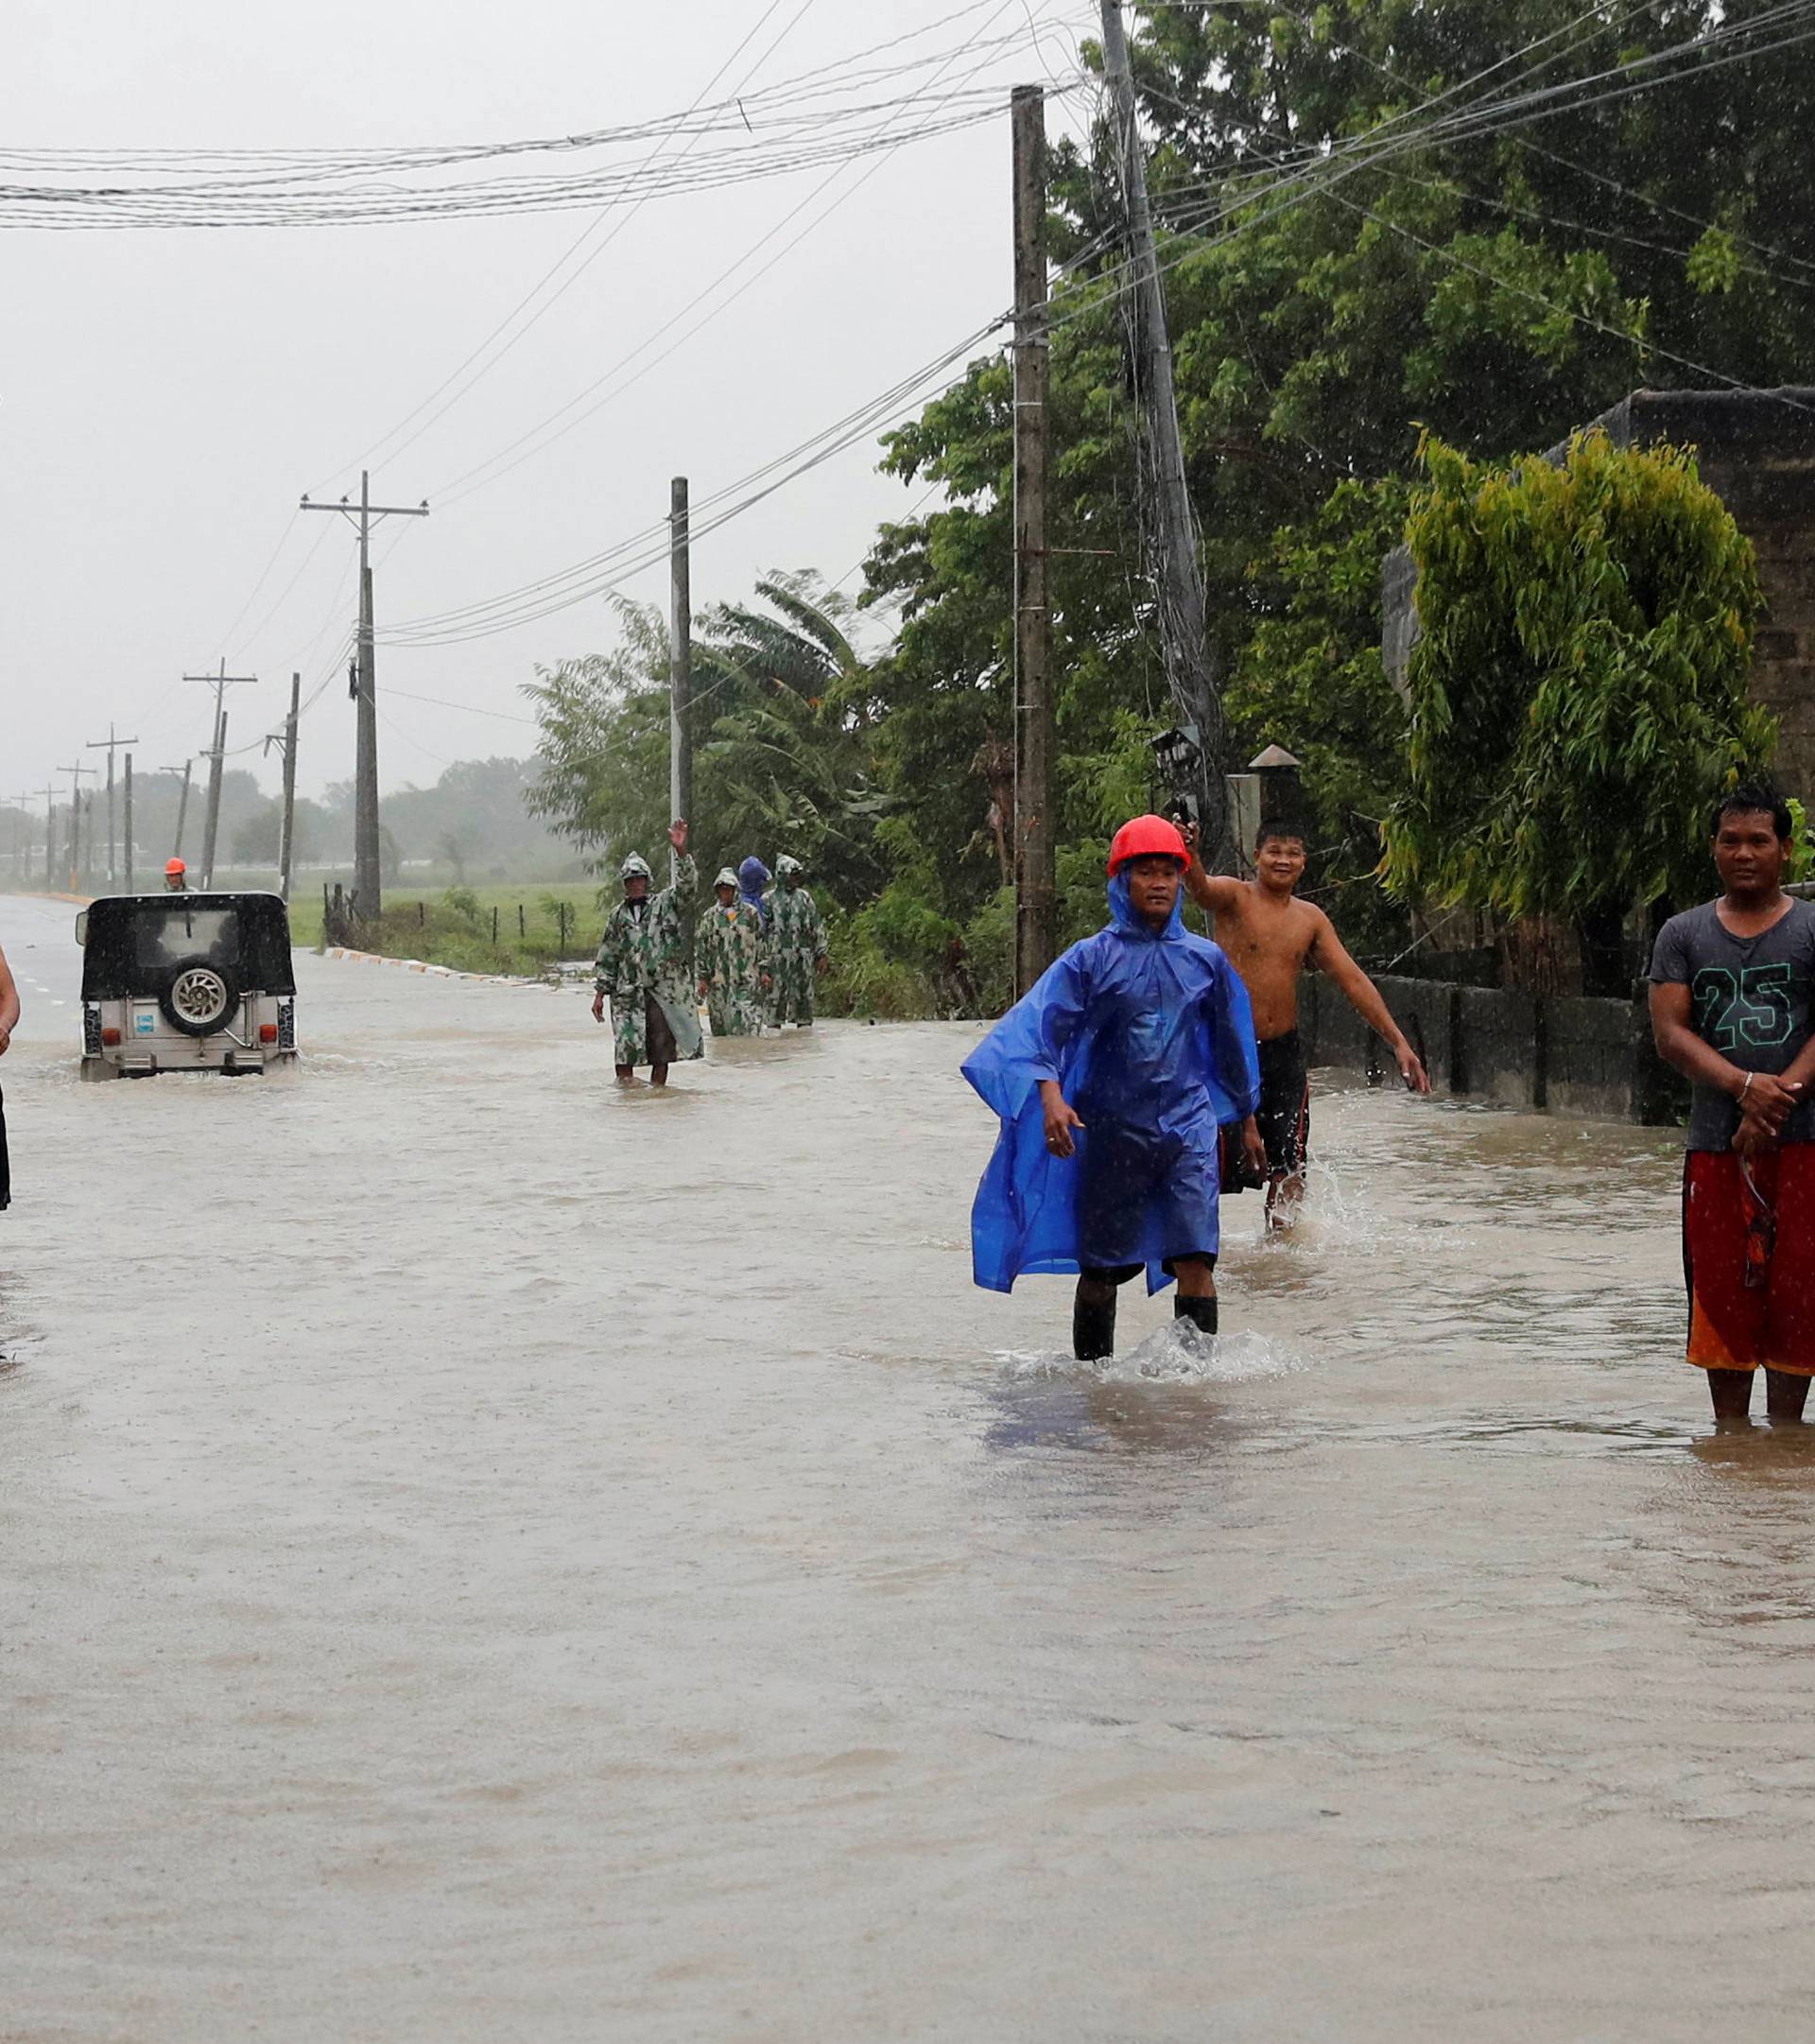 Stranded commuters stand on a partially flooded road after Typhoon Mangkhut hit the main island of Luzon, in Carranglan, Nueva Ecija